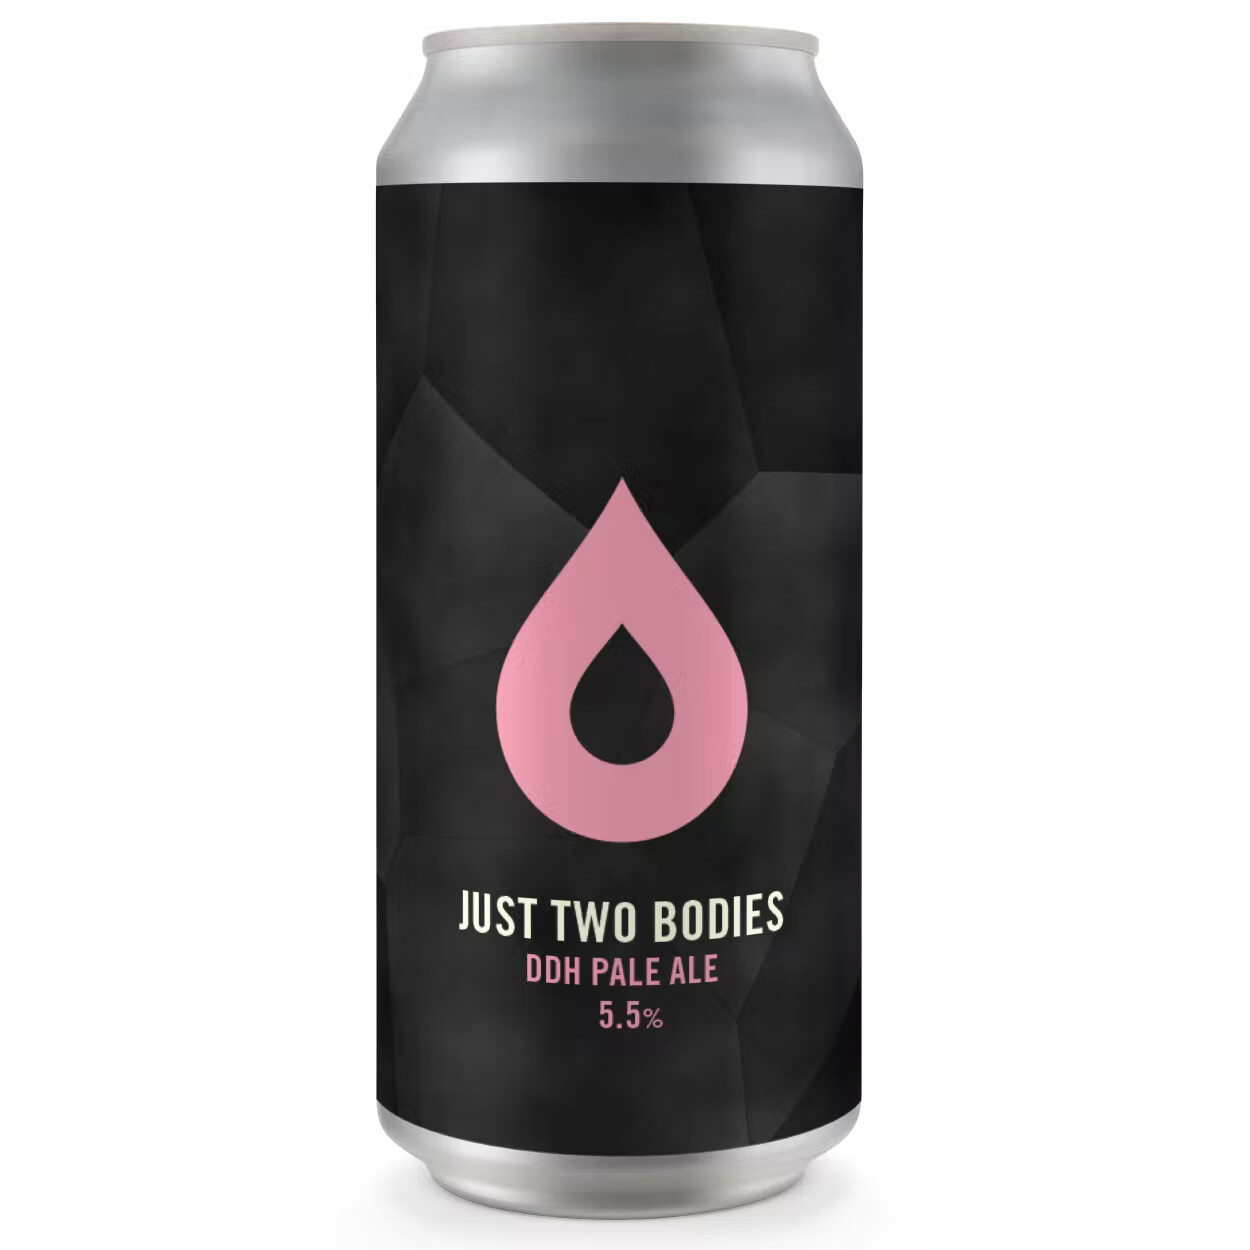 Polly's Just Two Bodies DDH Pale Ale